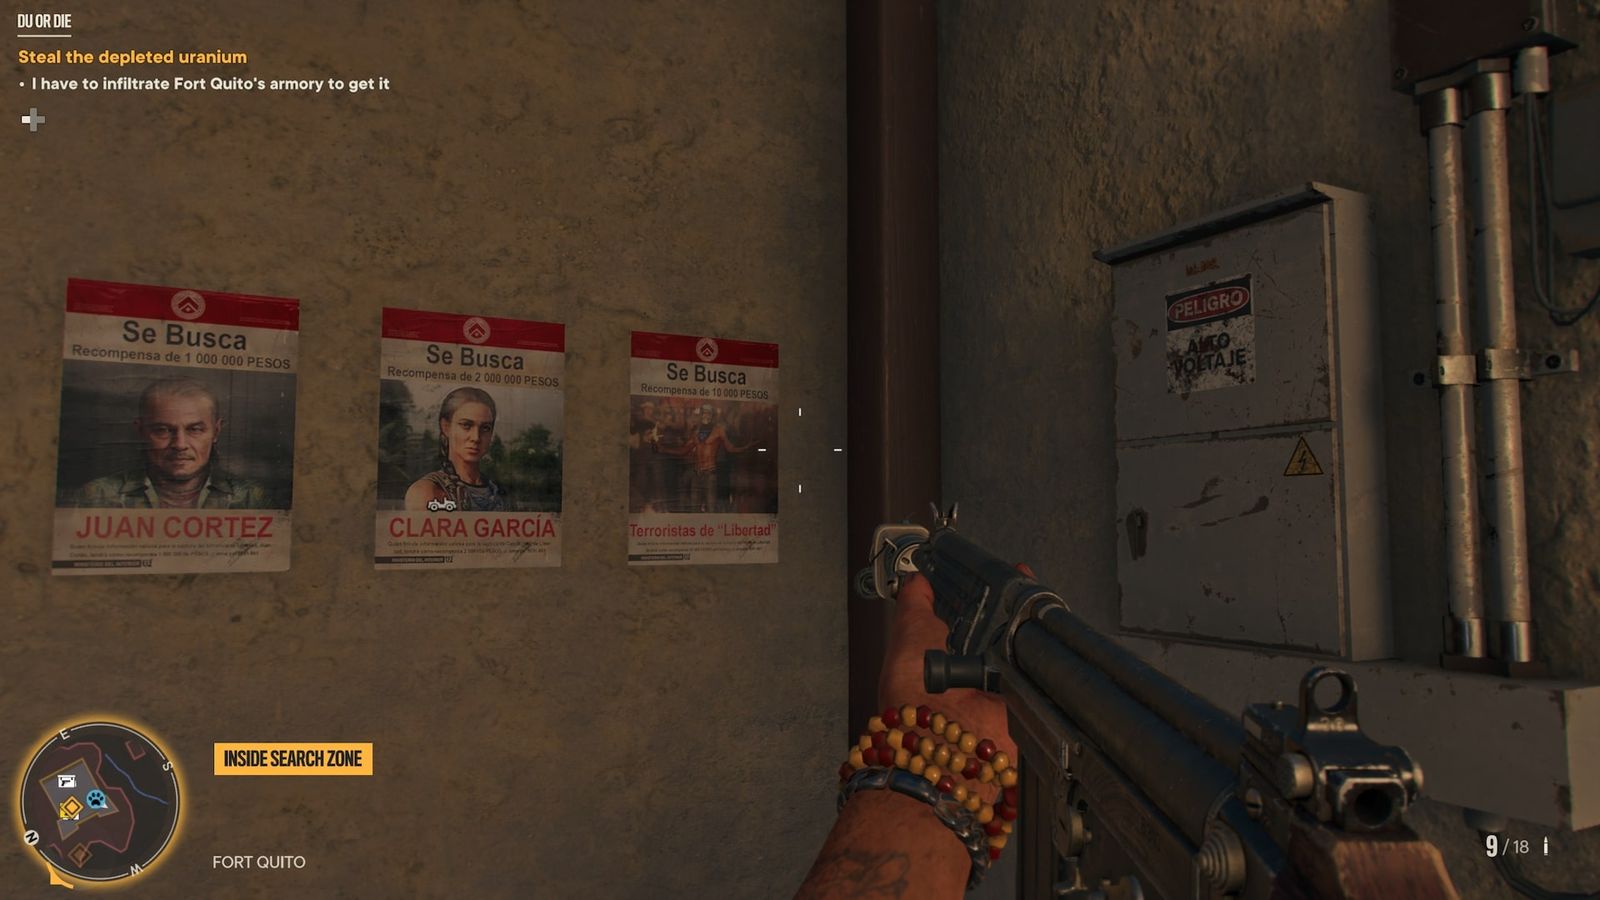 Posters in Fort Quitad of Yara's most wanted, including Clara and Juan of Libertad.